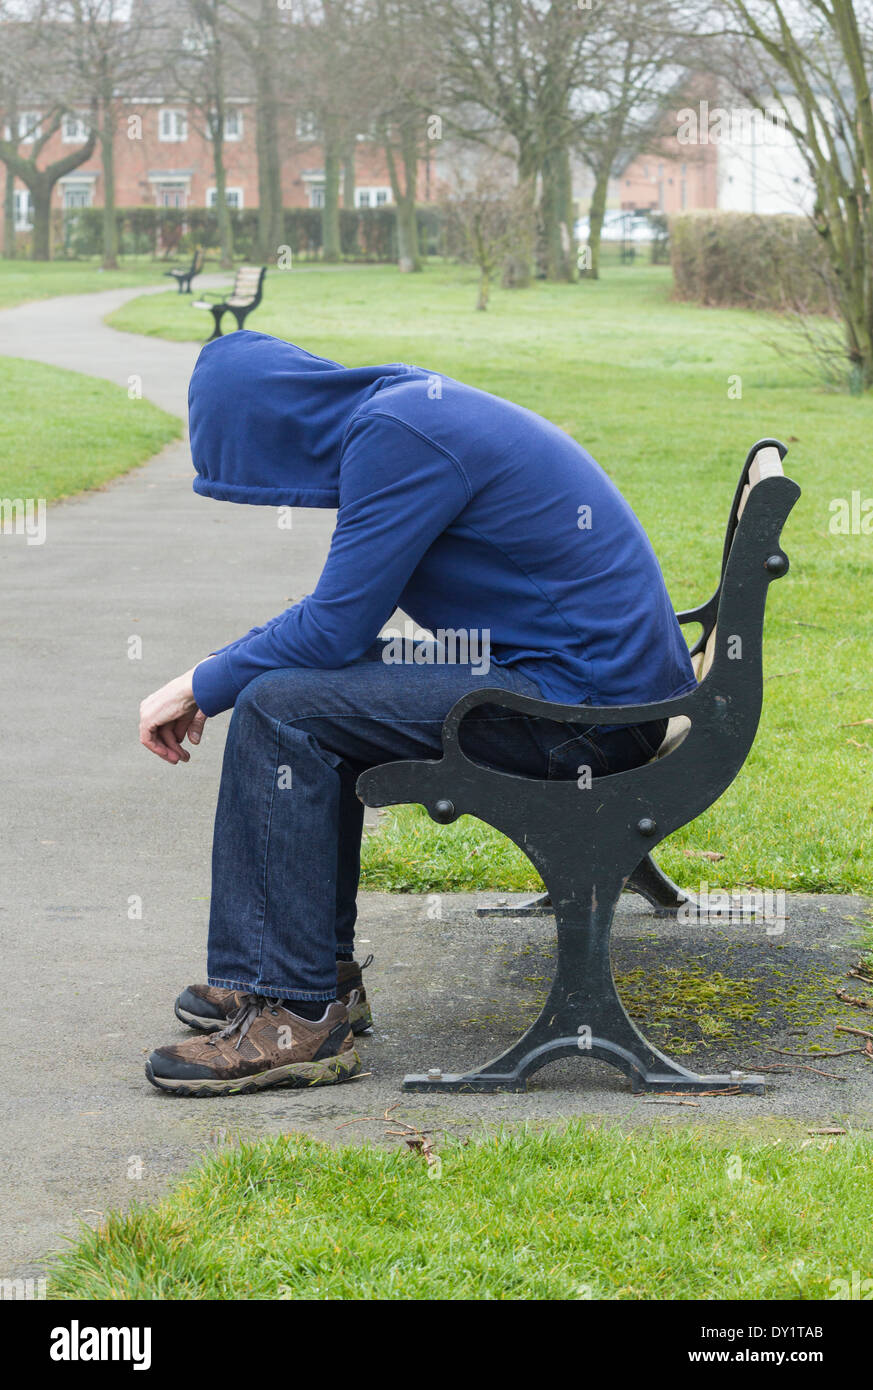 wearing sitting bench Stock hoodie Photo on park Alamy - Male